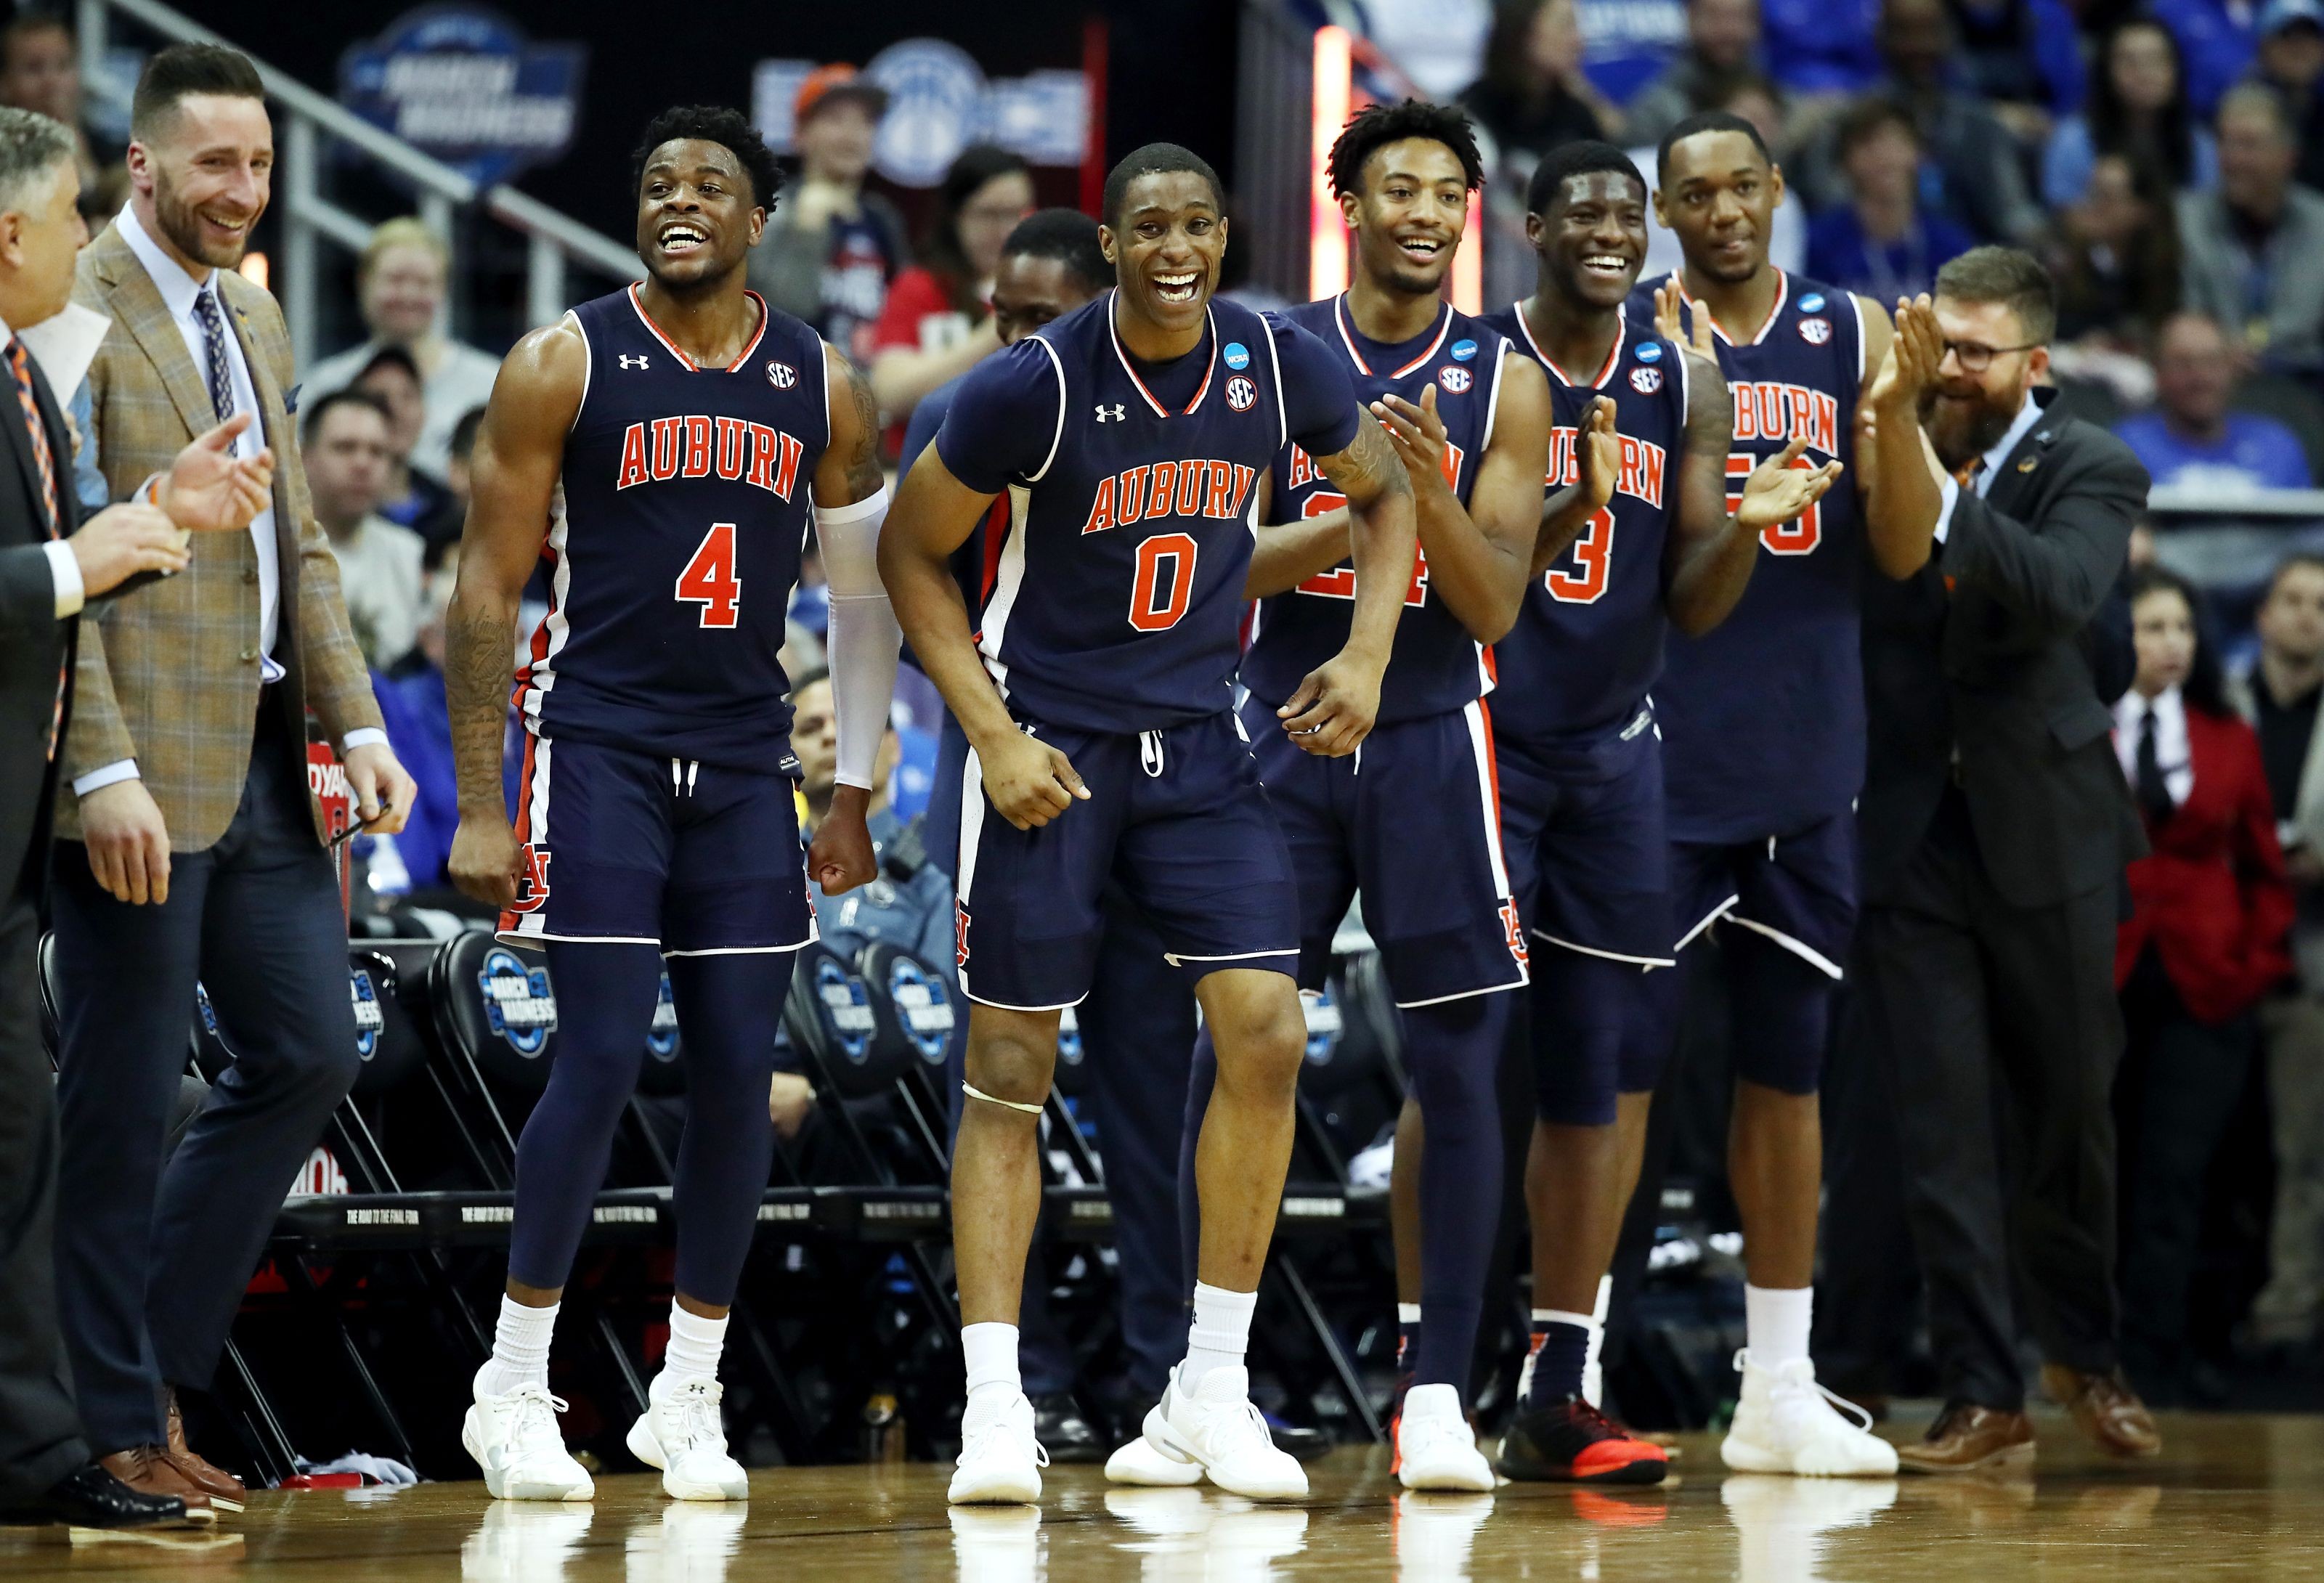 Do It for Chuma The New Auburn Basketball Mission Statement